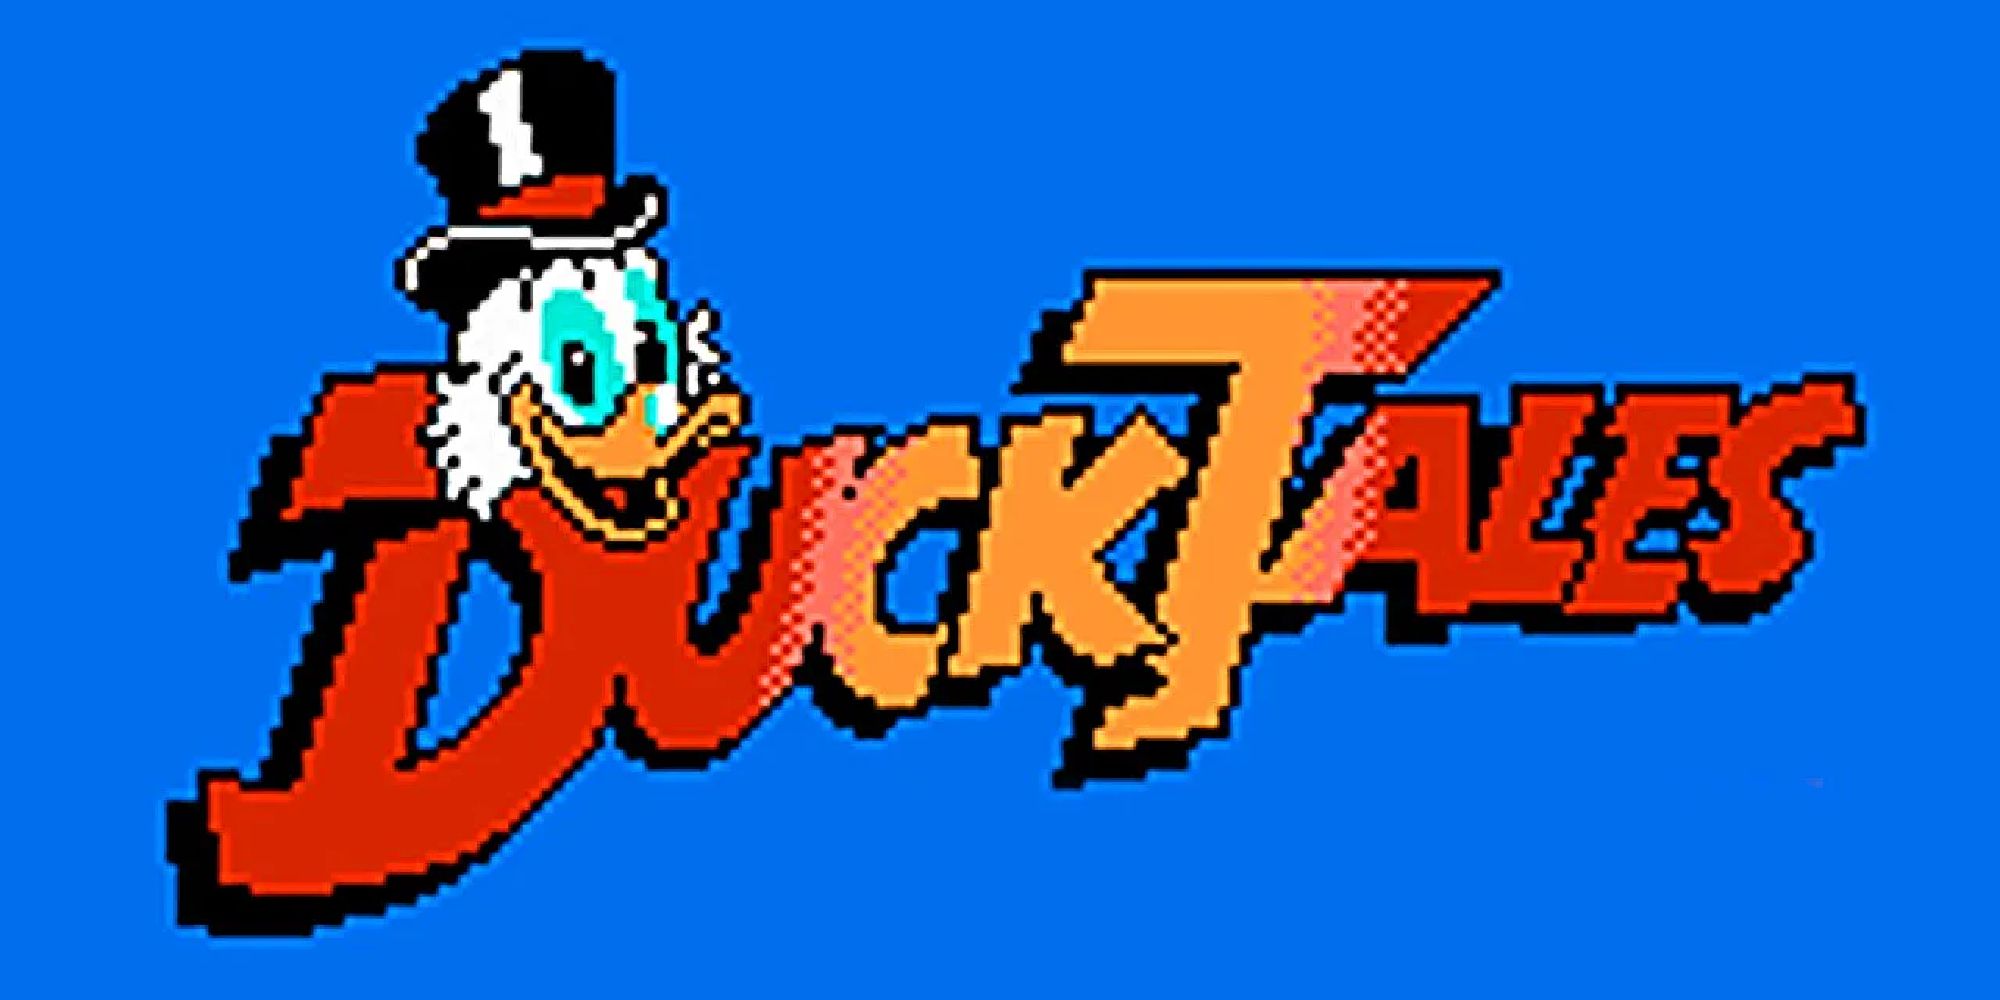 The title screen from Capcom's DuckTales for the NES, showing Scrooge McDuck smiling next to the game's title